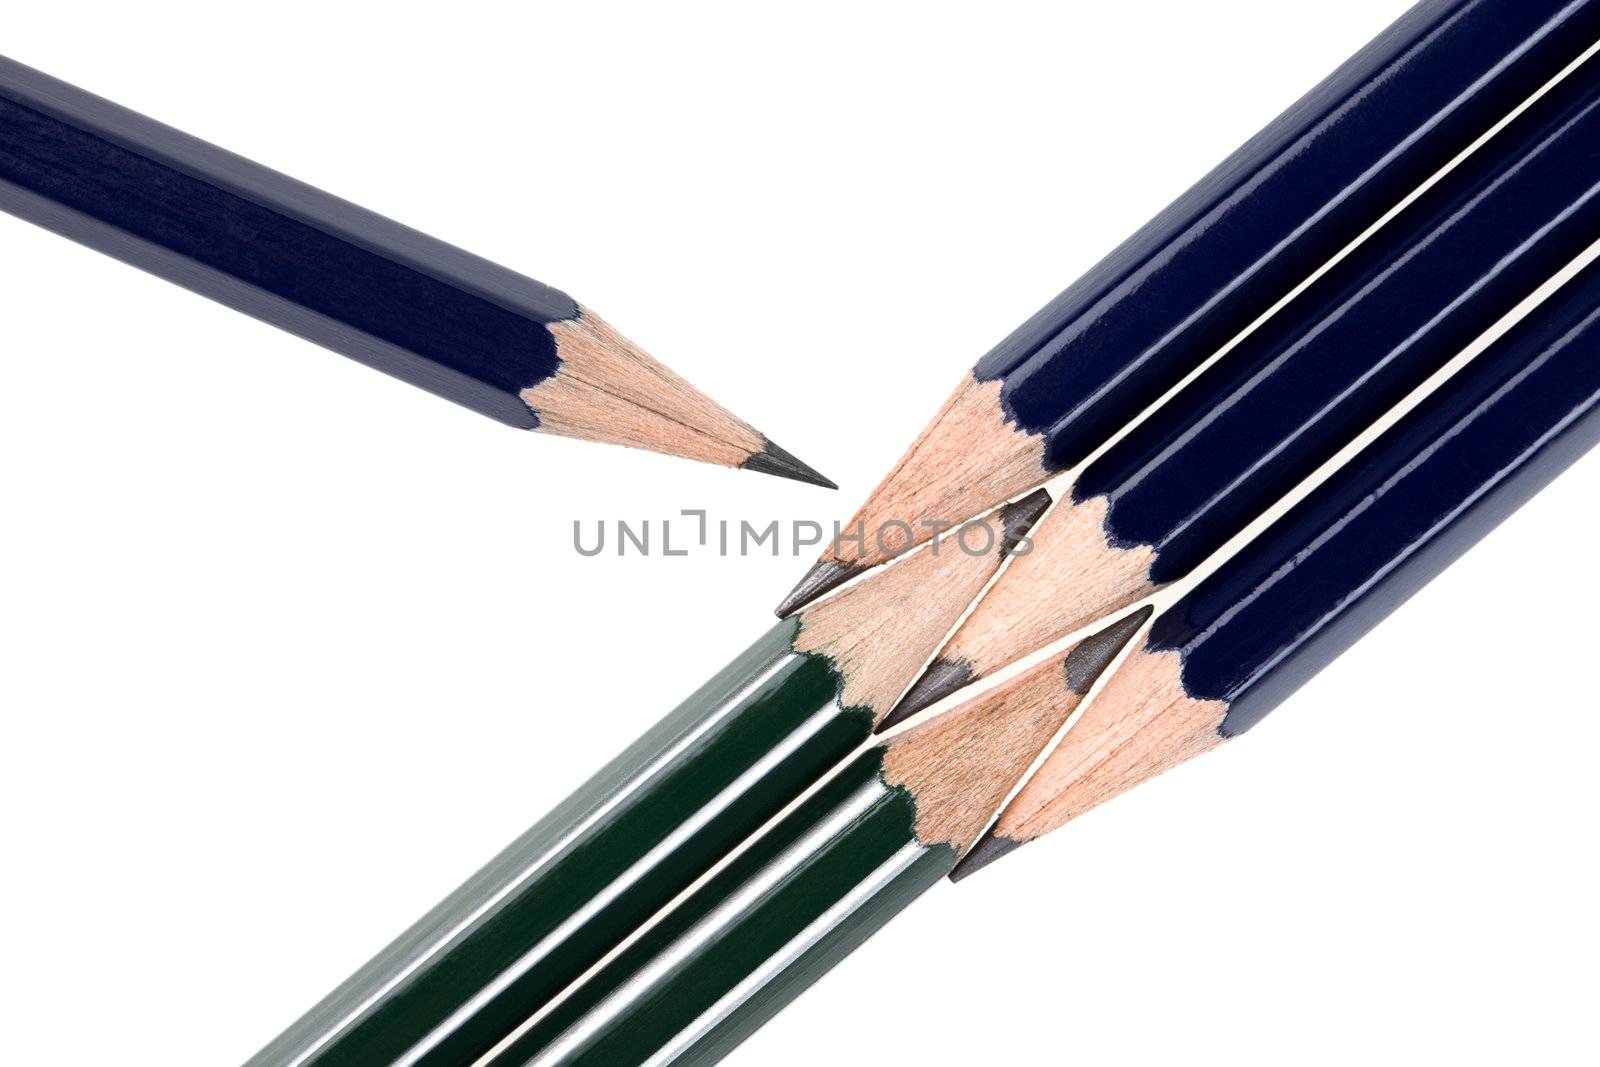 Kit of green and blue pencils on white background